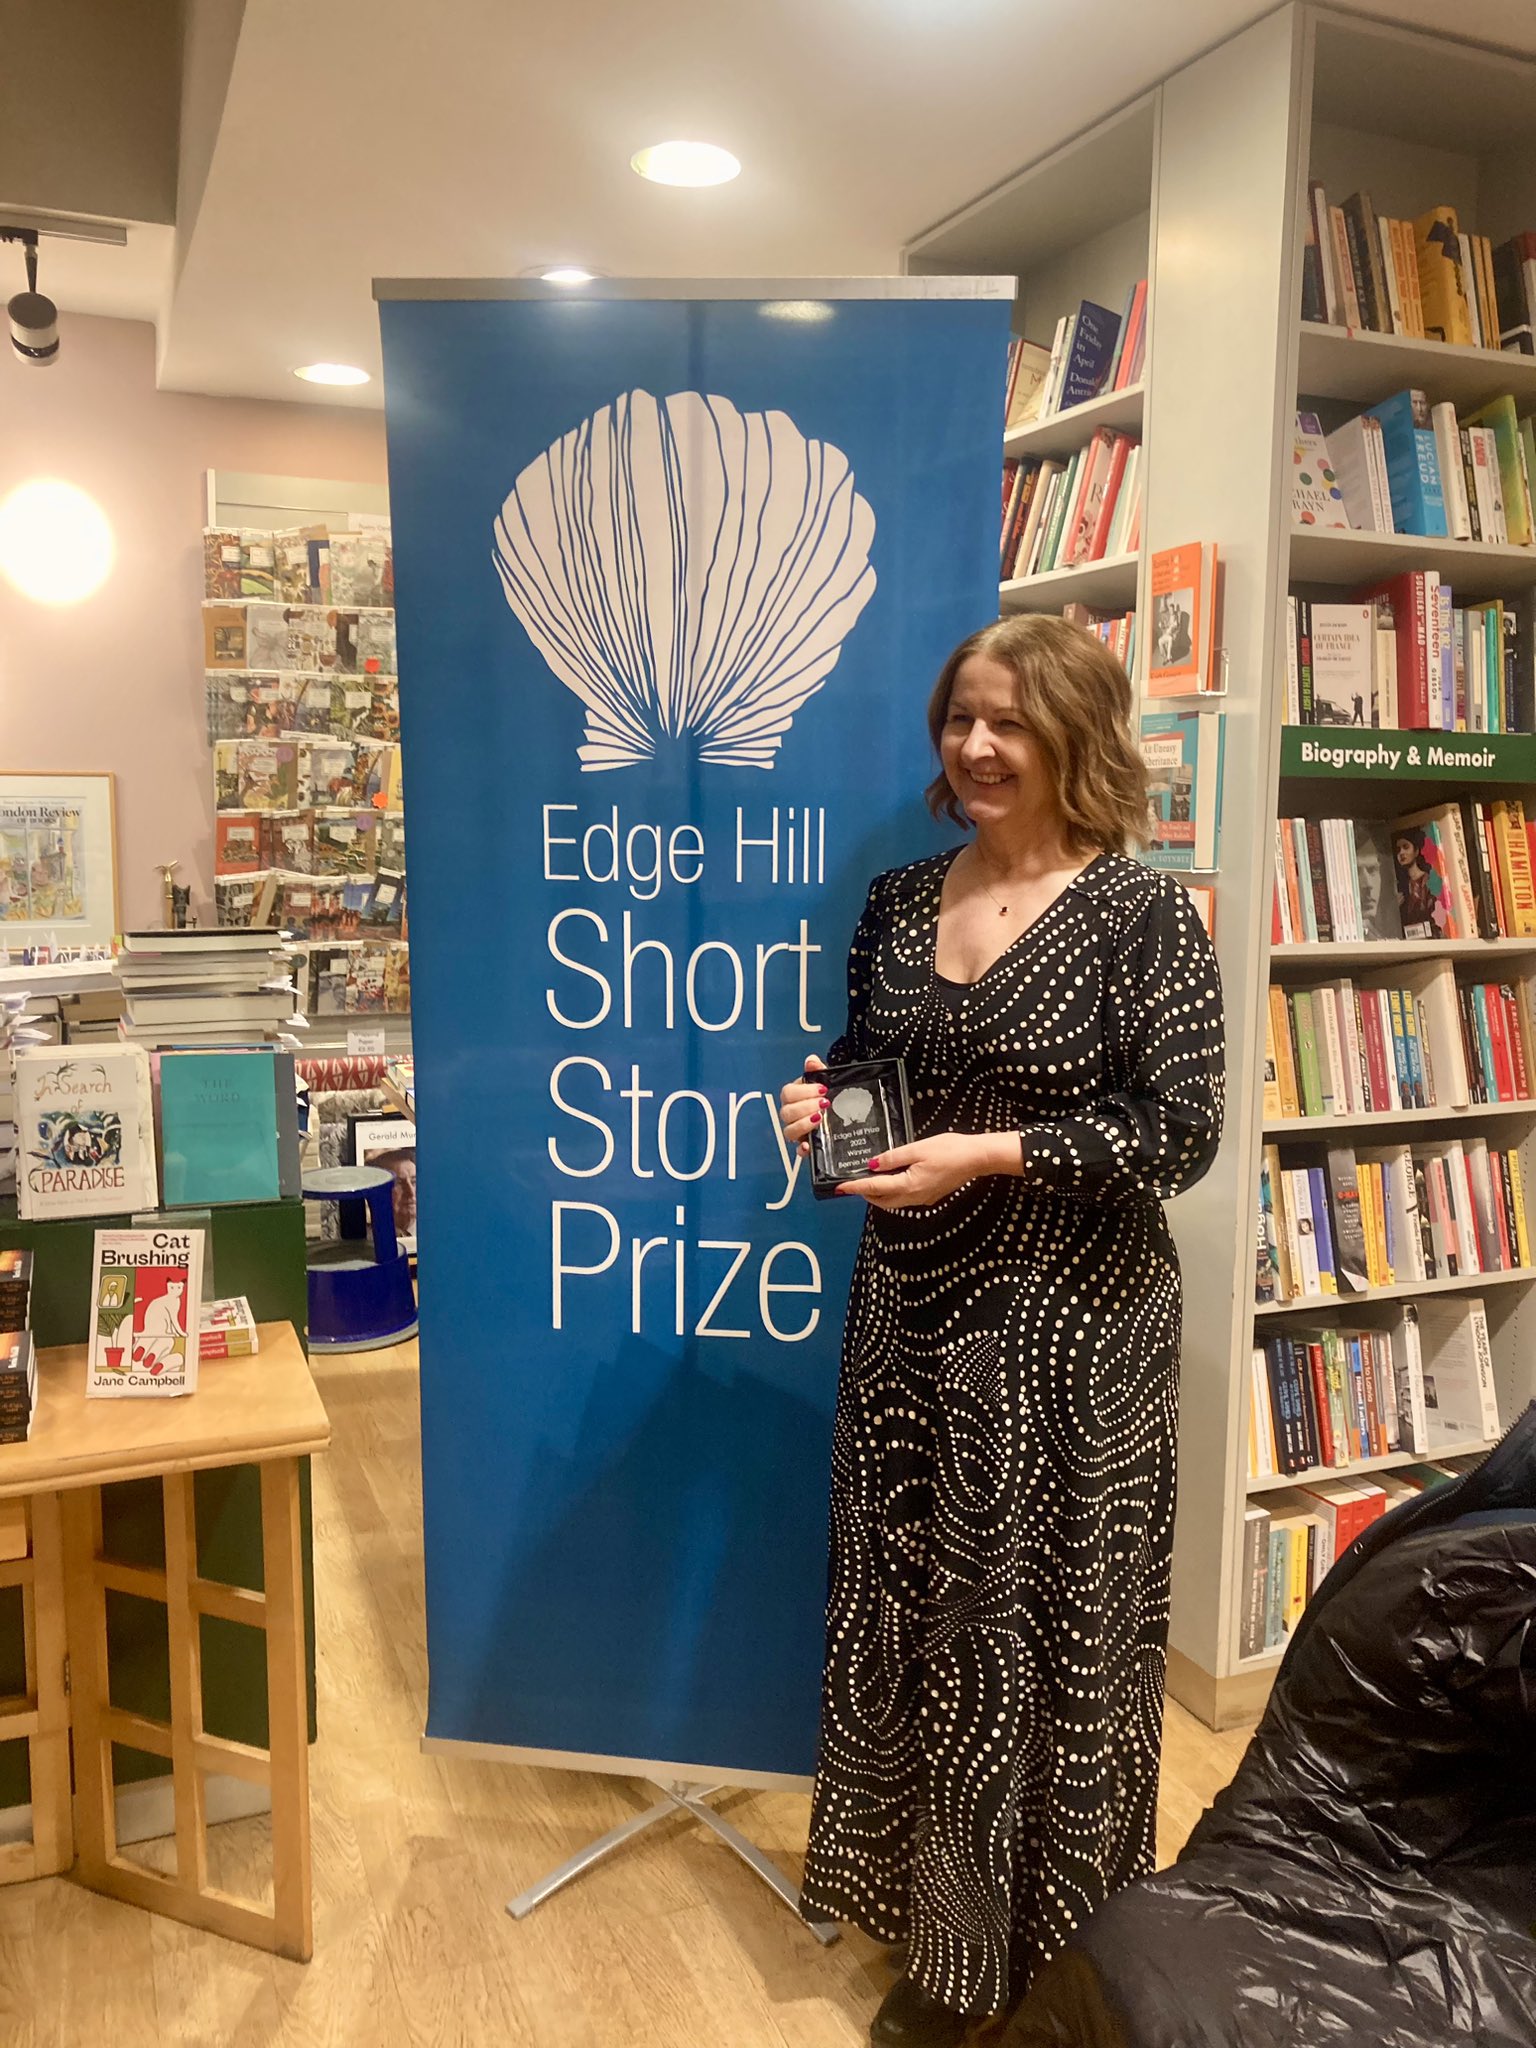 Bernie McGill at the Edge Hill Short Story Prize